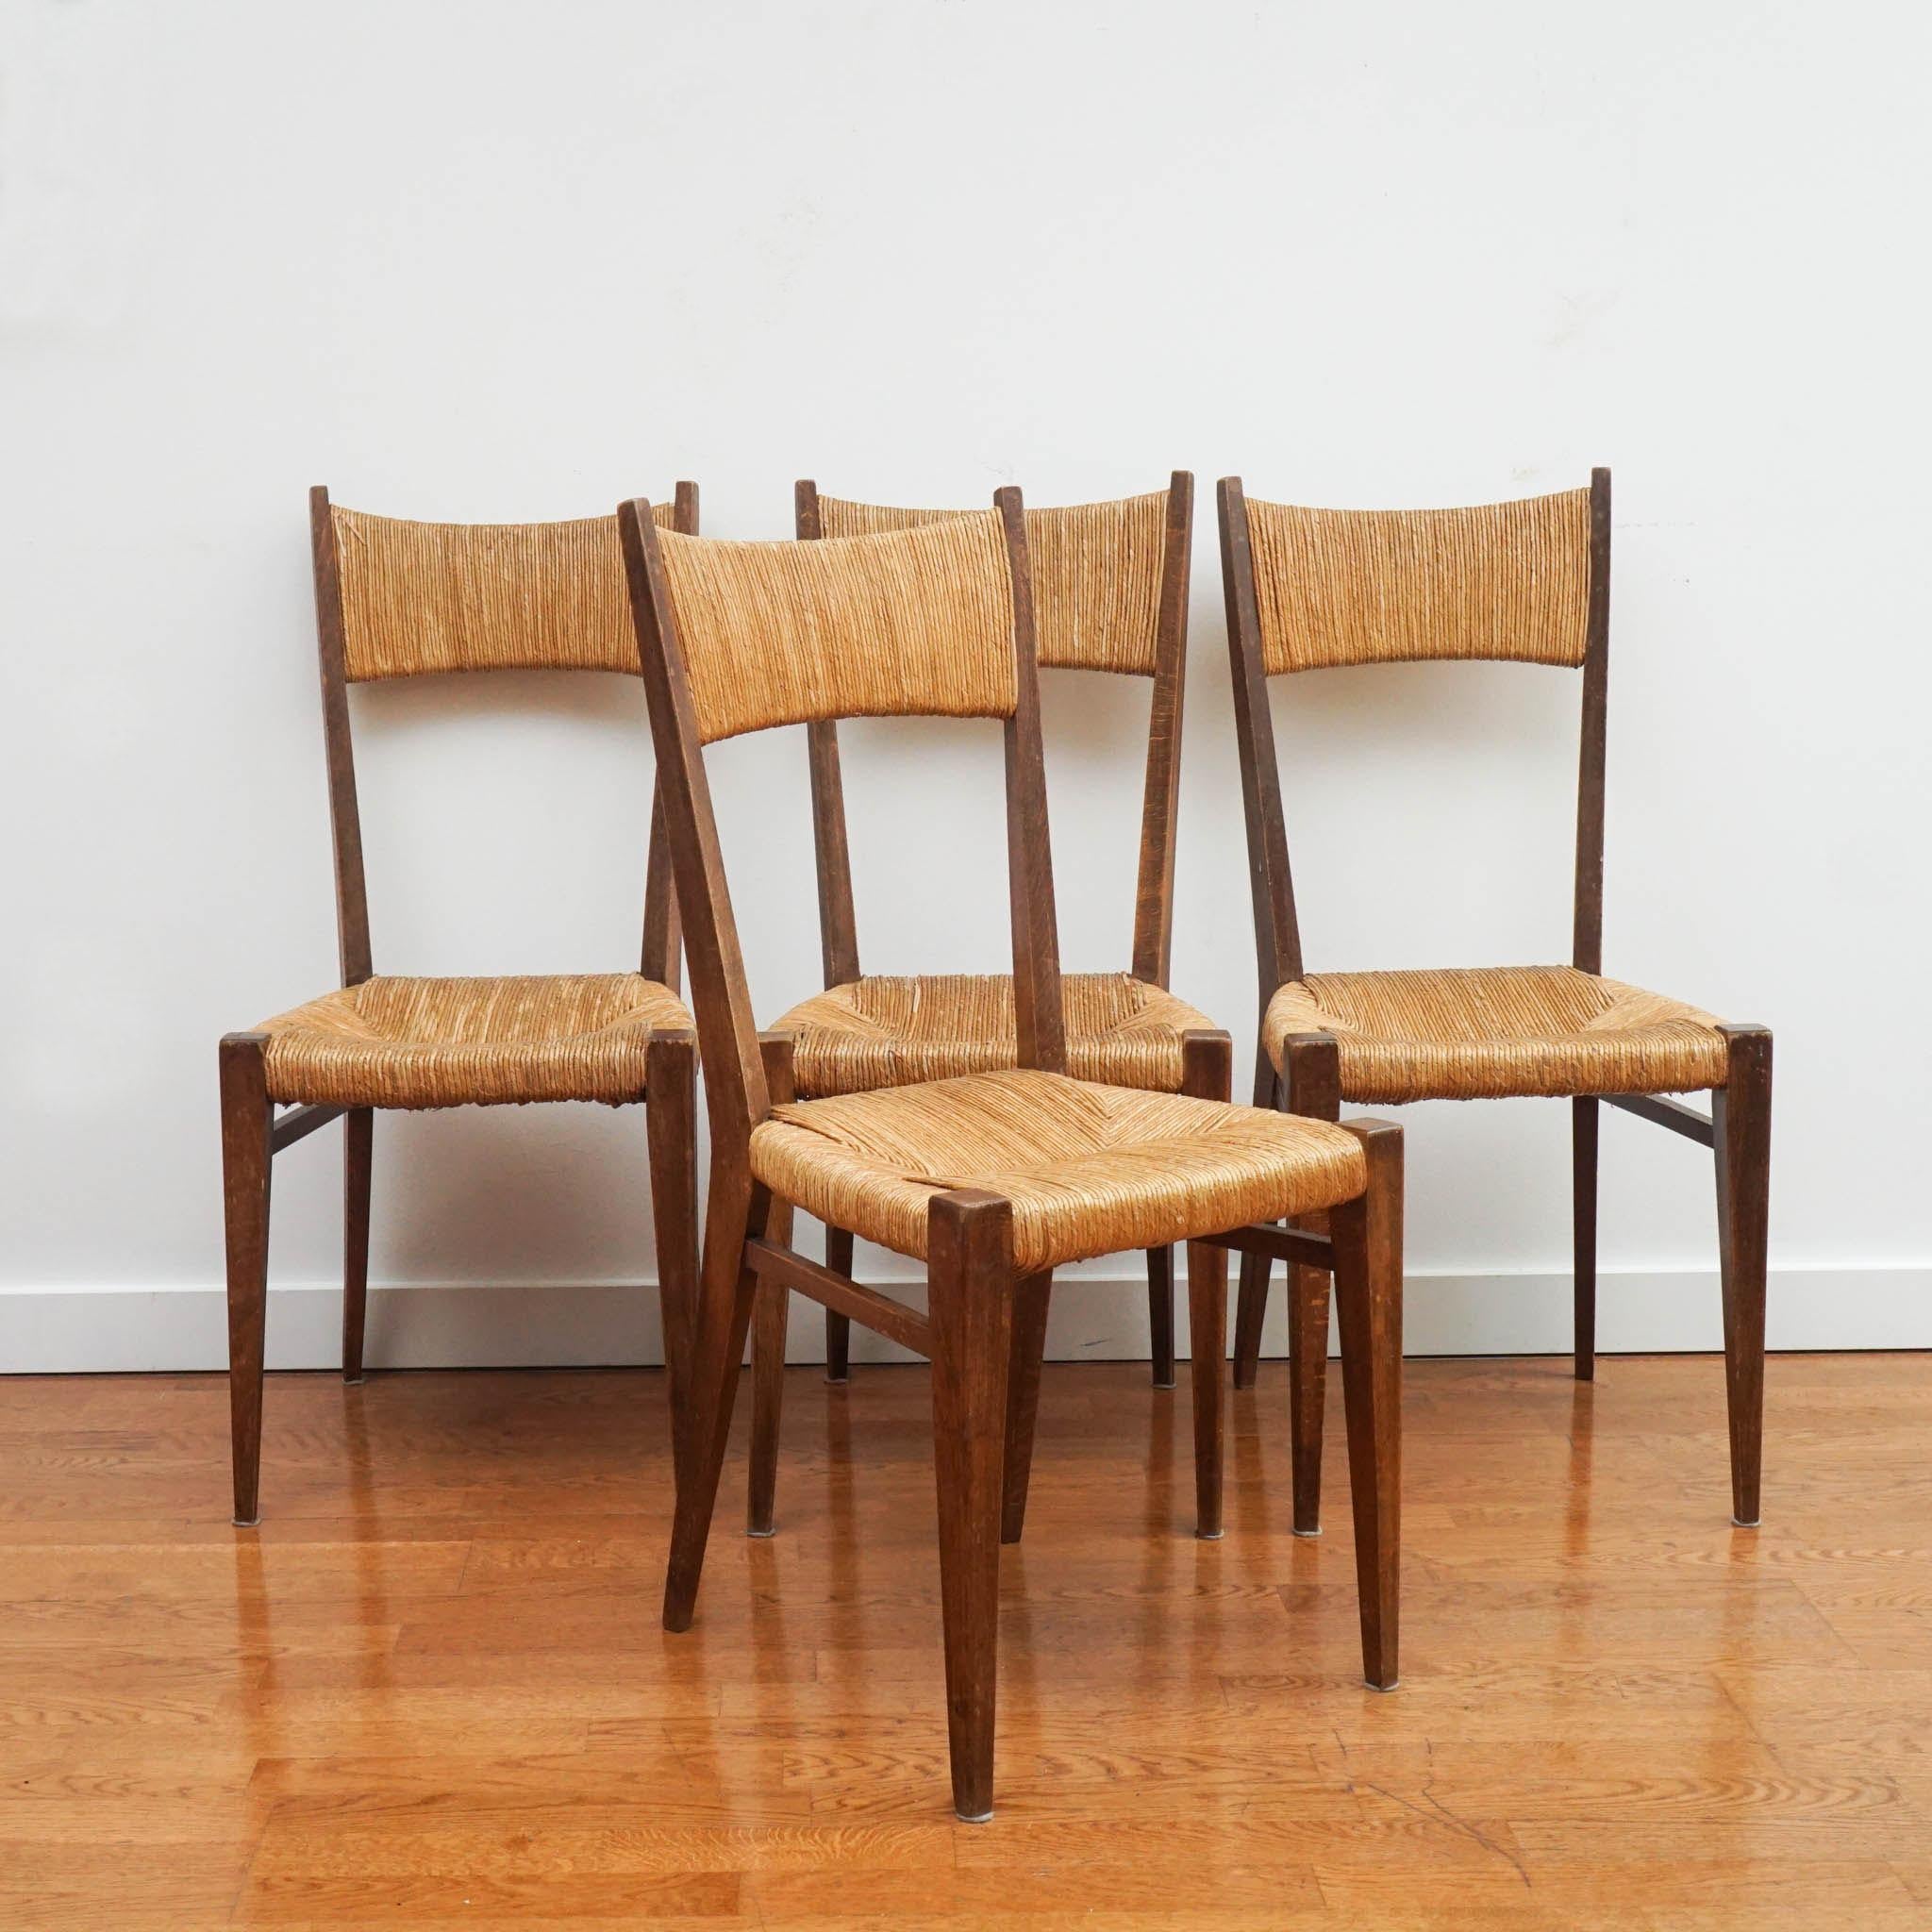 Woven Dining Chairs For Sale 6